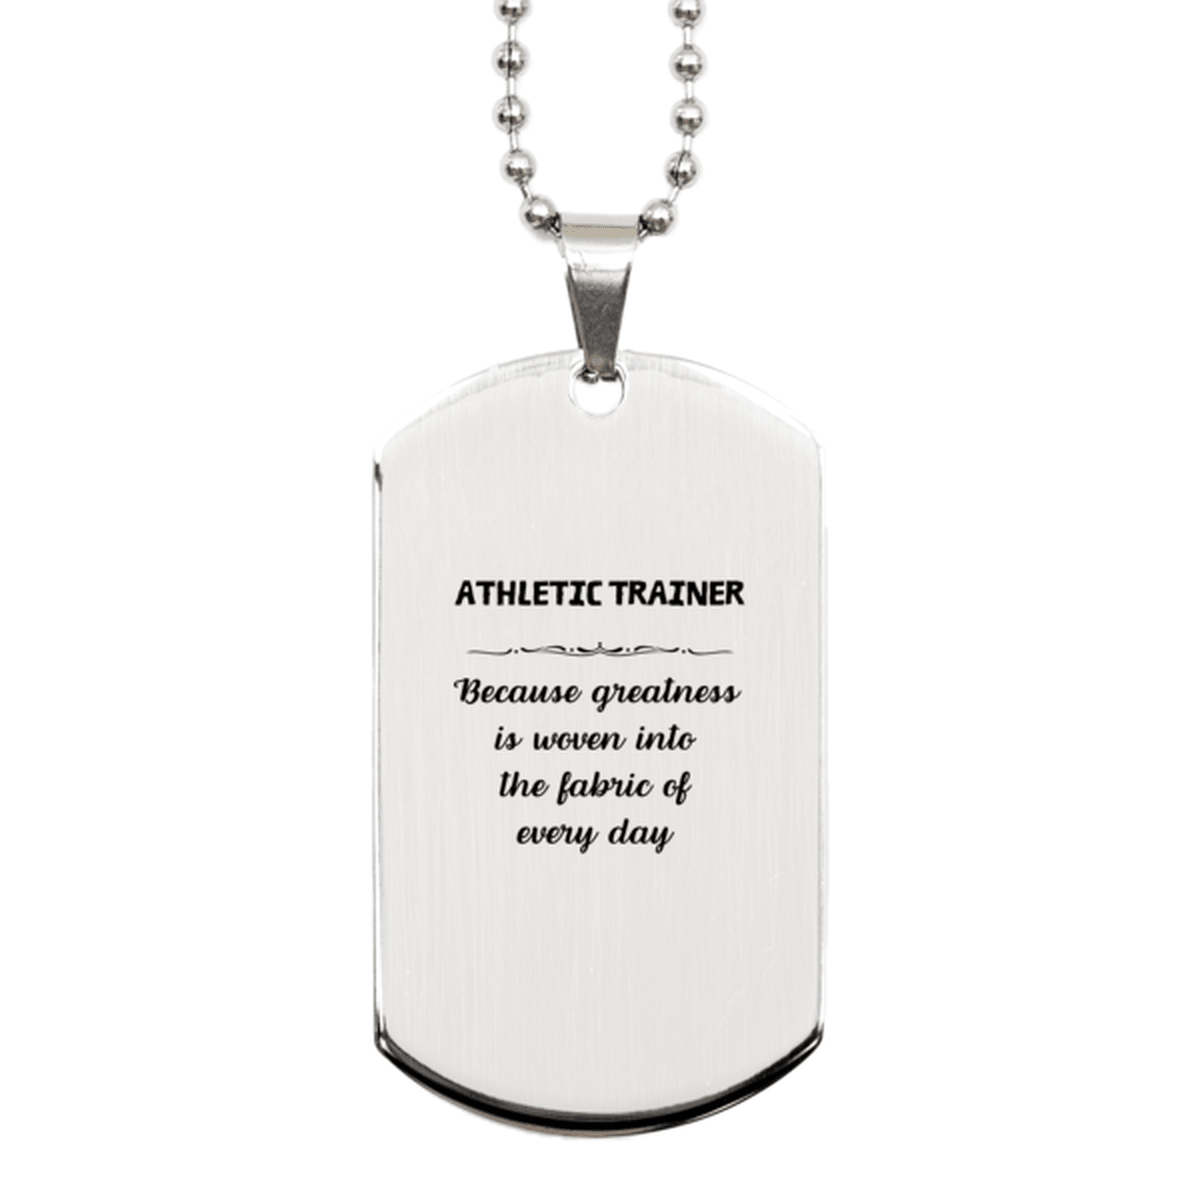 Sarcastic Athletic Trainer Silver Dog Tag Gifts, Christmas Holiday Gifts for Athletic Trainer Birthday, Athletic Trainer: Because greatness is woven into the fabric of every day, Coworkers, Friends - Mallard Moon Gift Shop